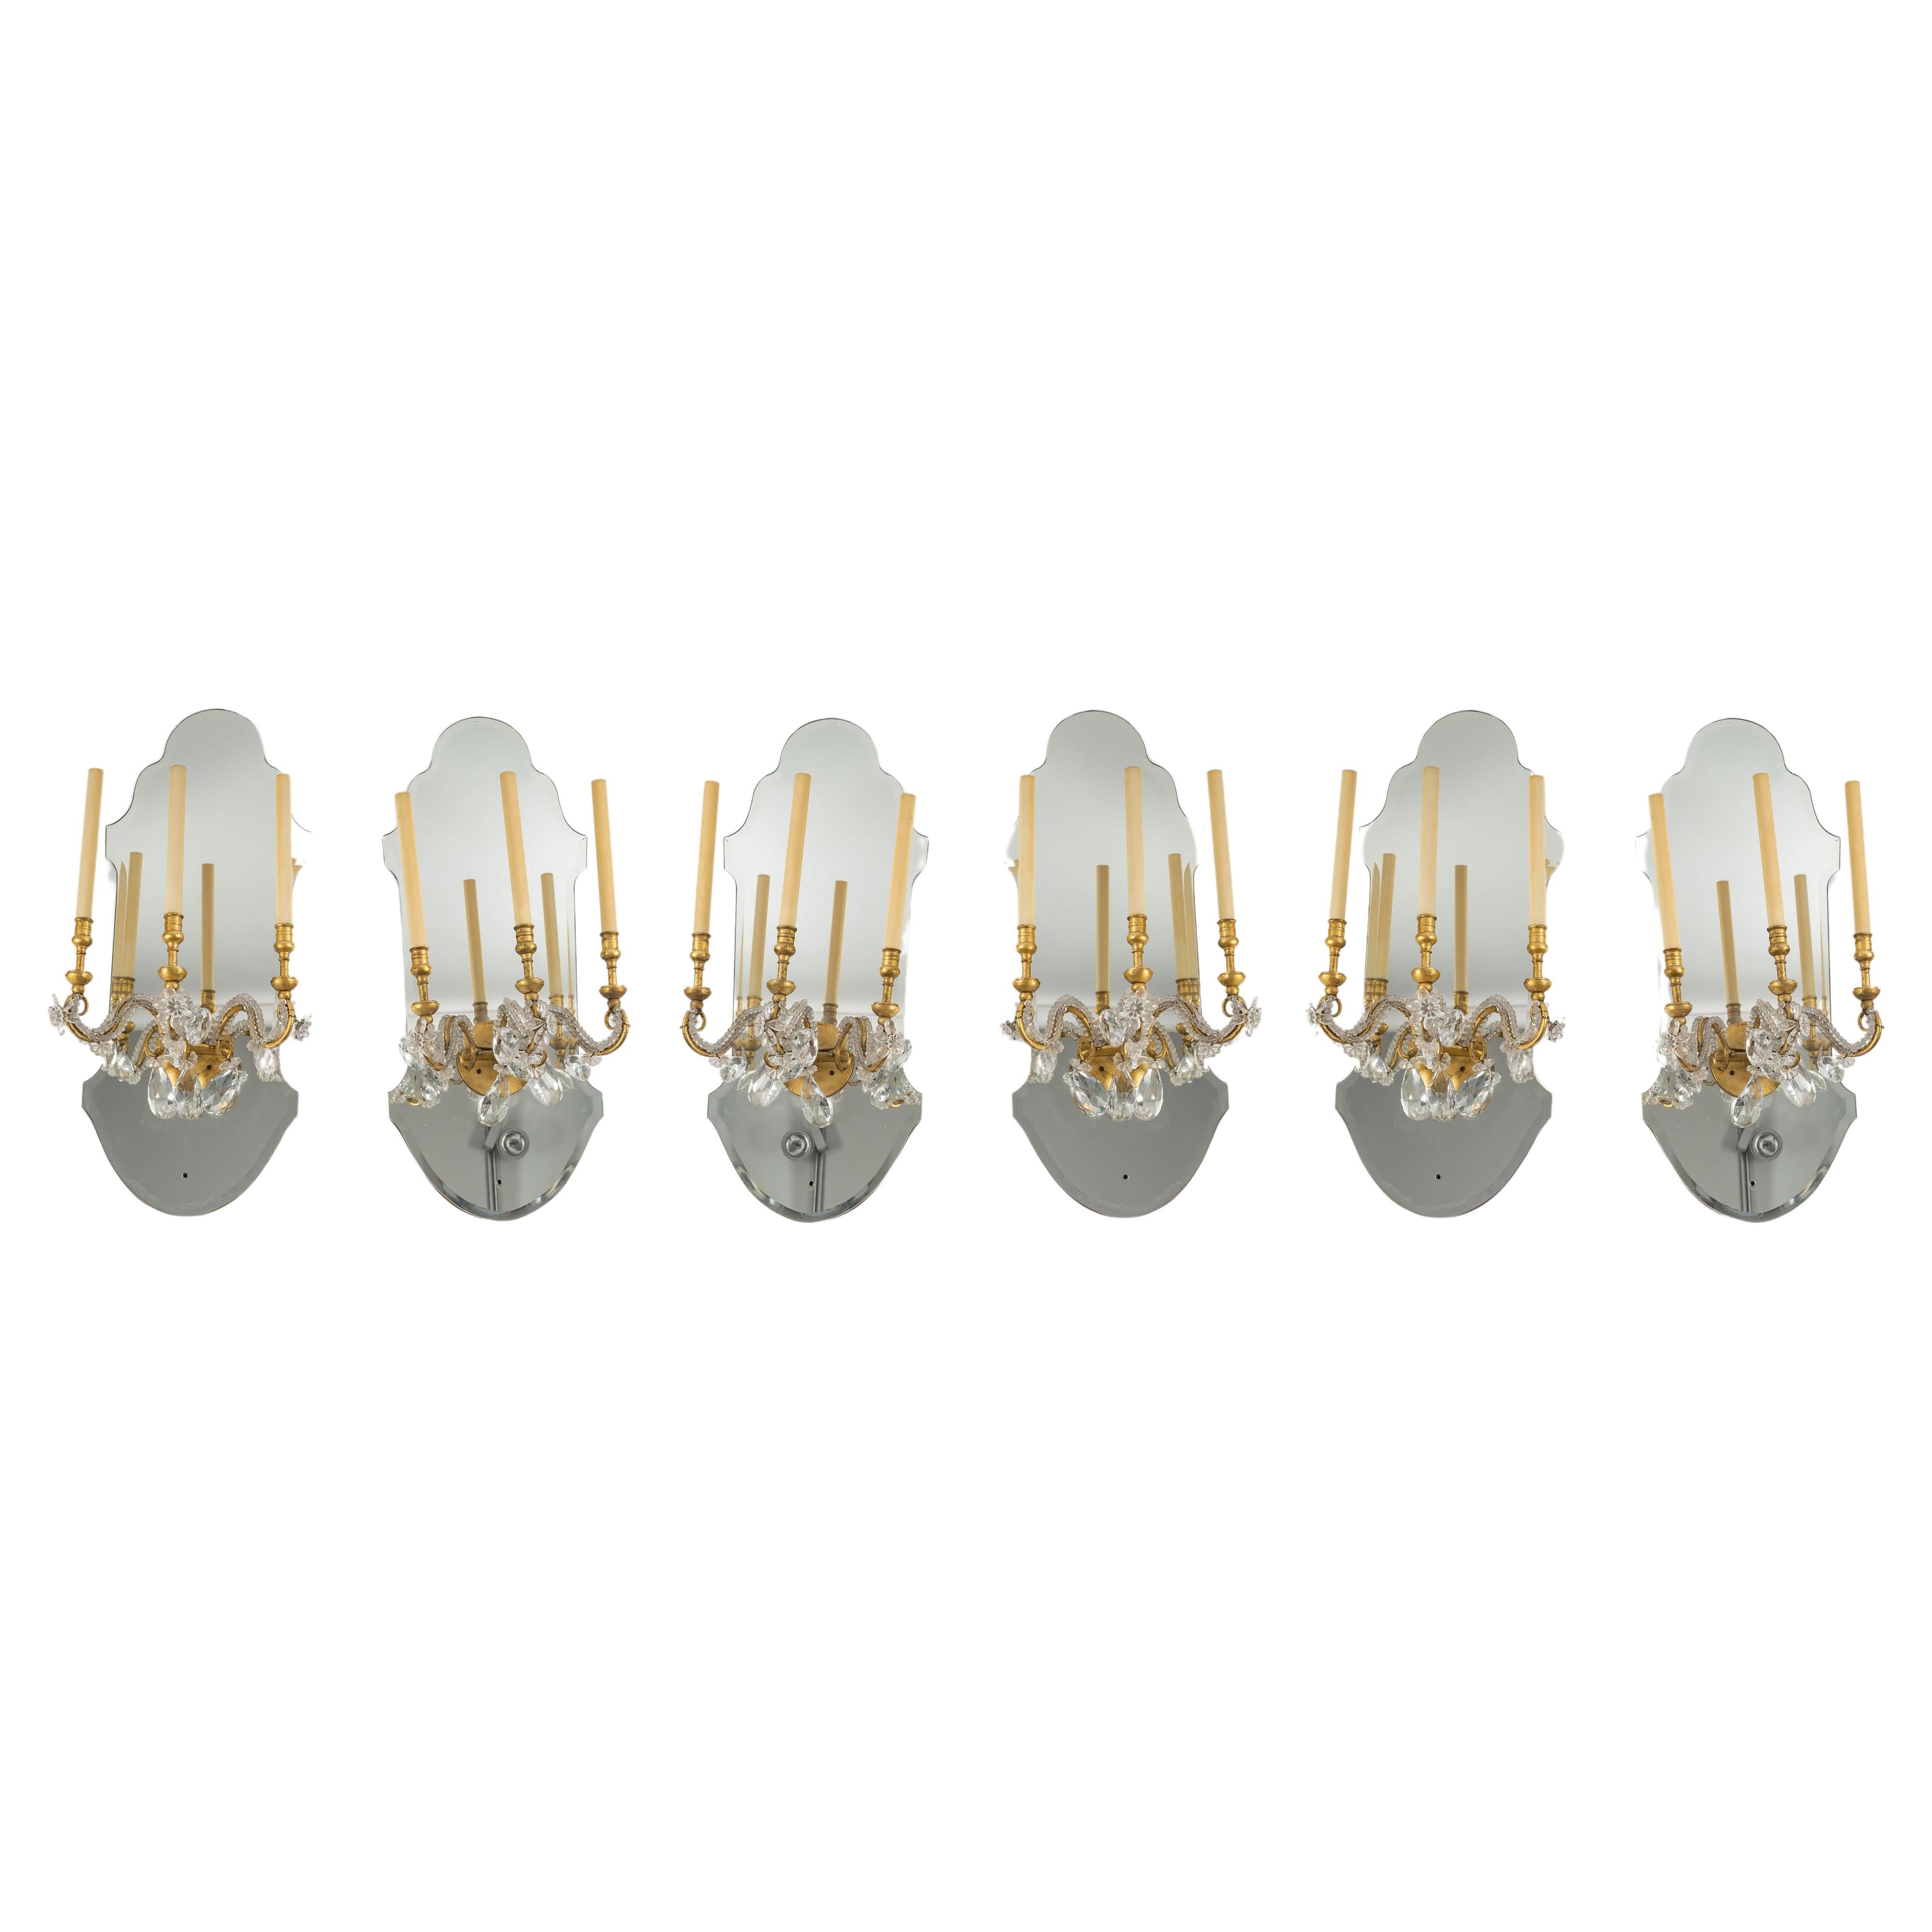 Suite of 6 Gilded Iron and Mirror Sconces with Glass Drops, 1950-1960.